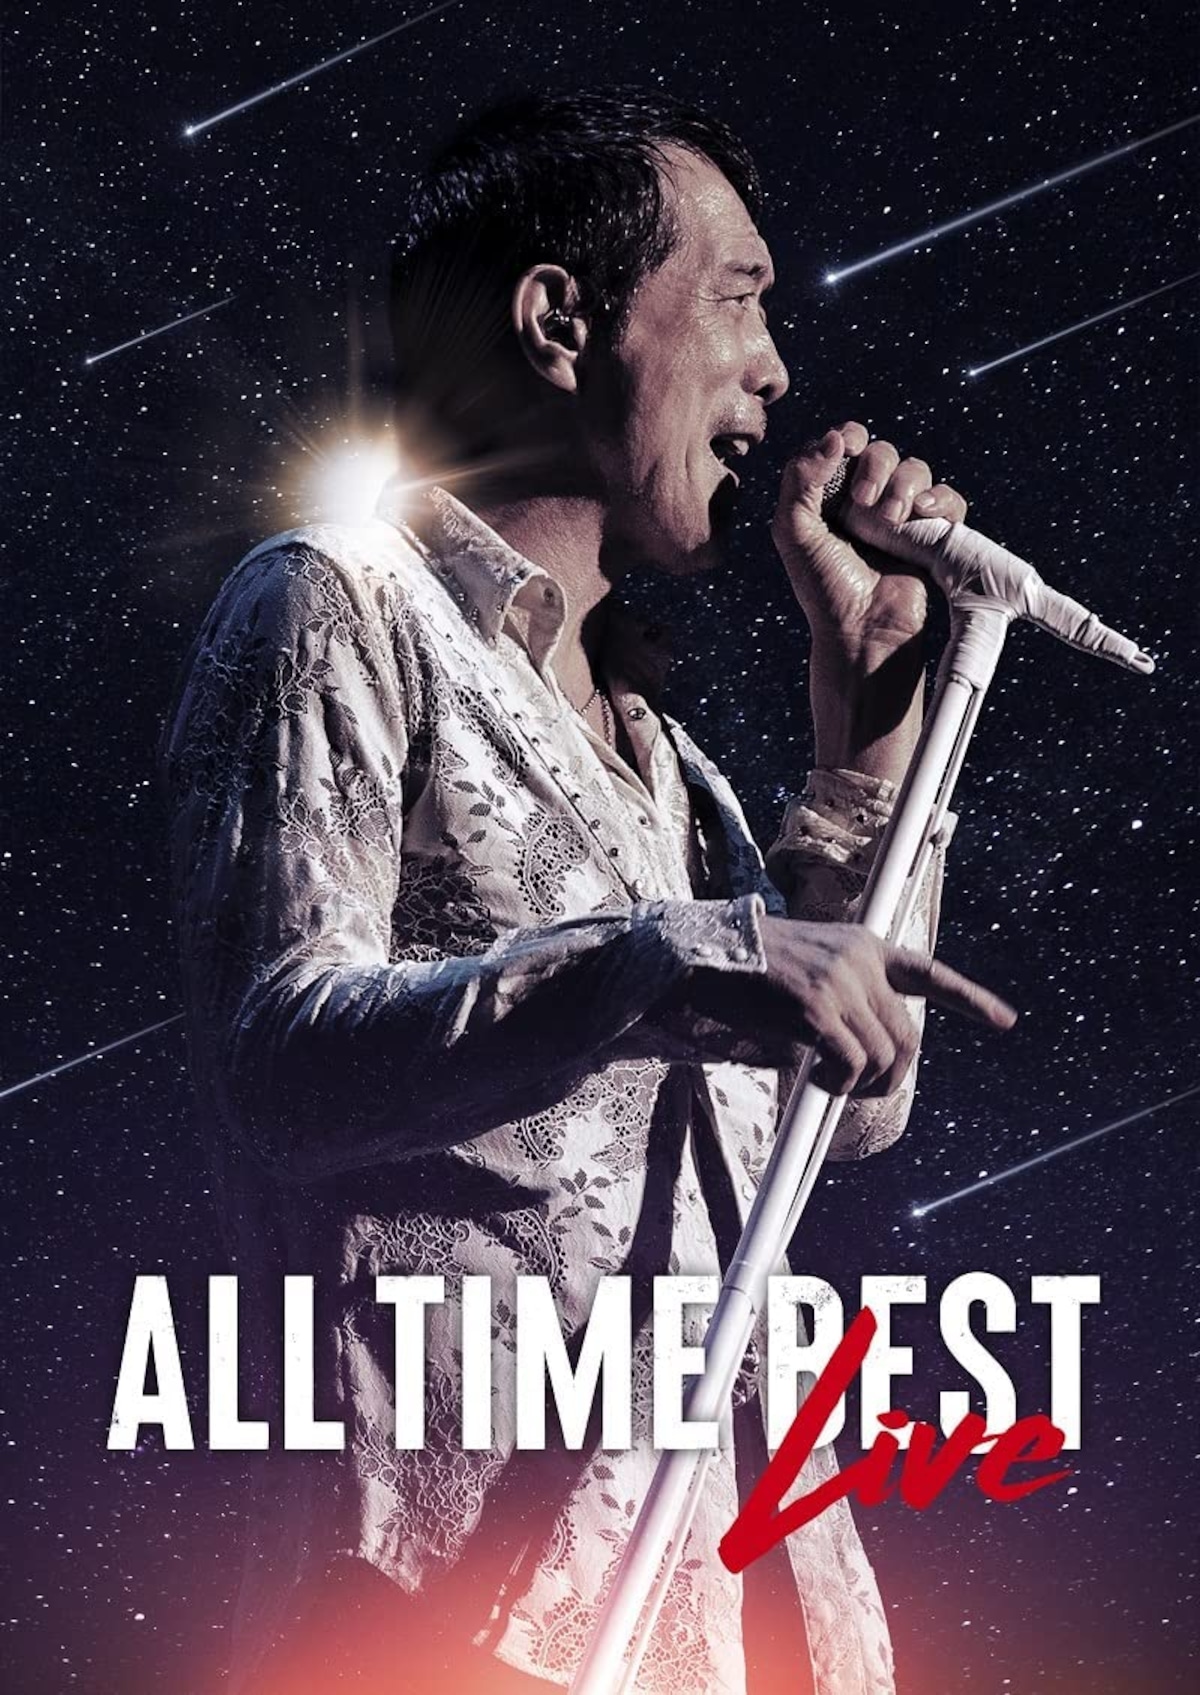 ALL TIME BEST LIVE（DVD版） / 矢沢永吉 | Ratspack Records